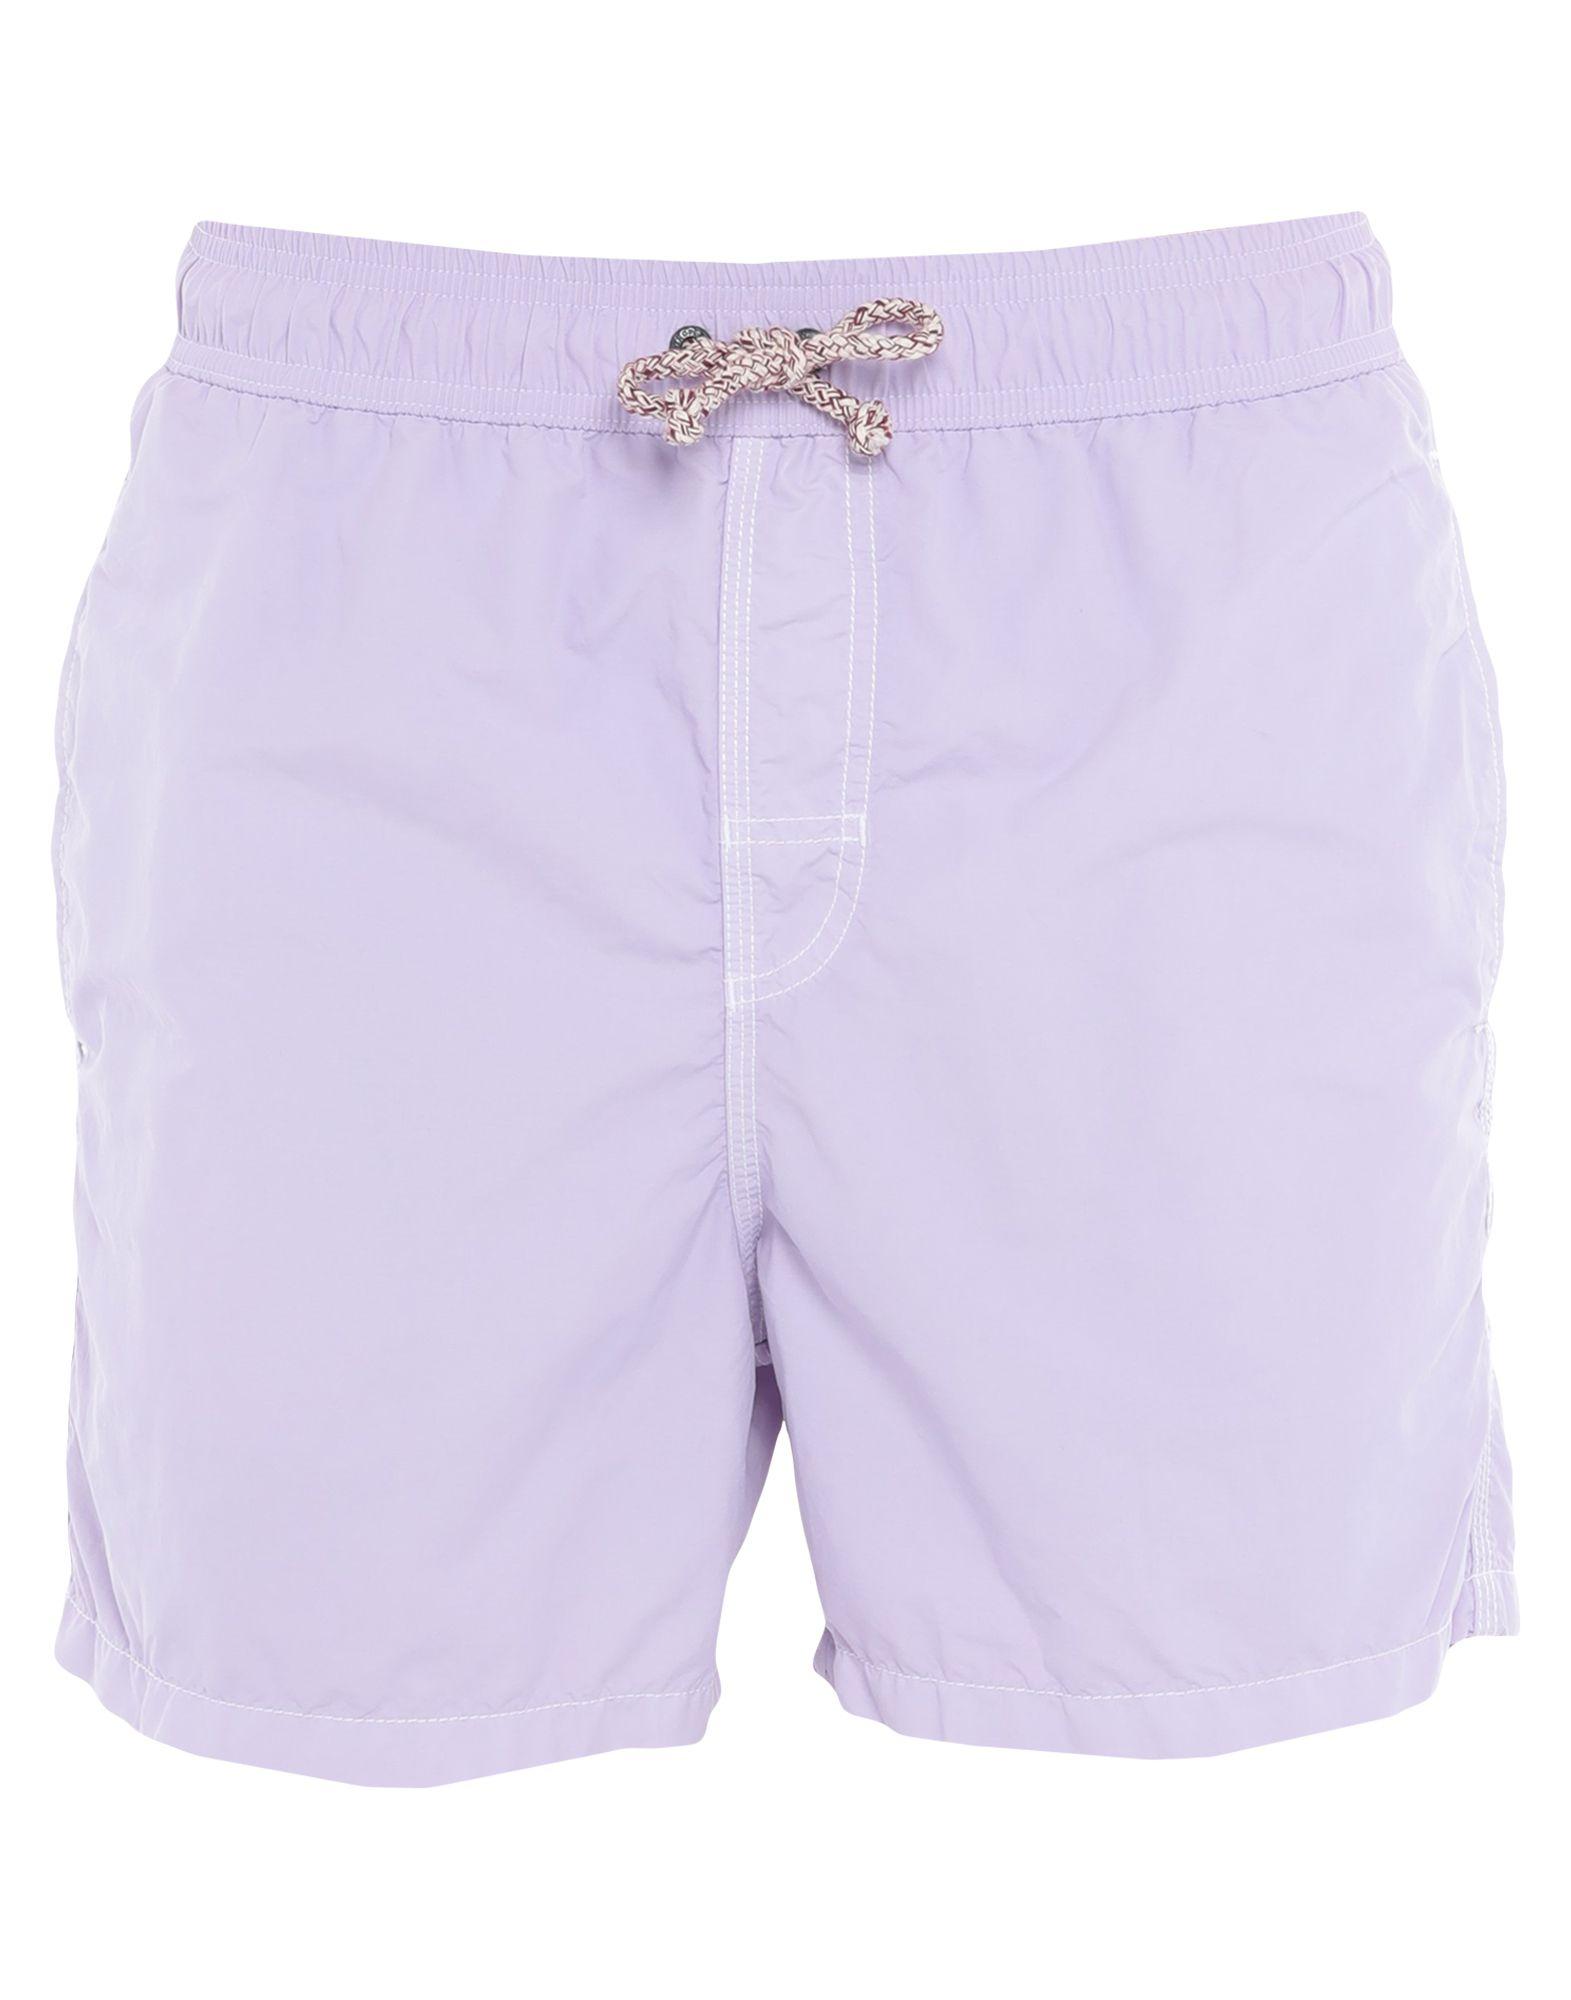 Gerry St. Tropez Synthetic Swim Trunks in Lilac (Purple) for Men - Lyst